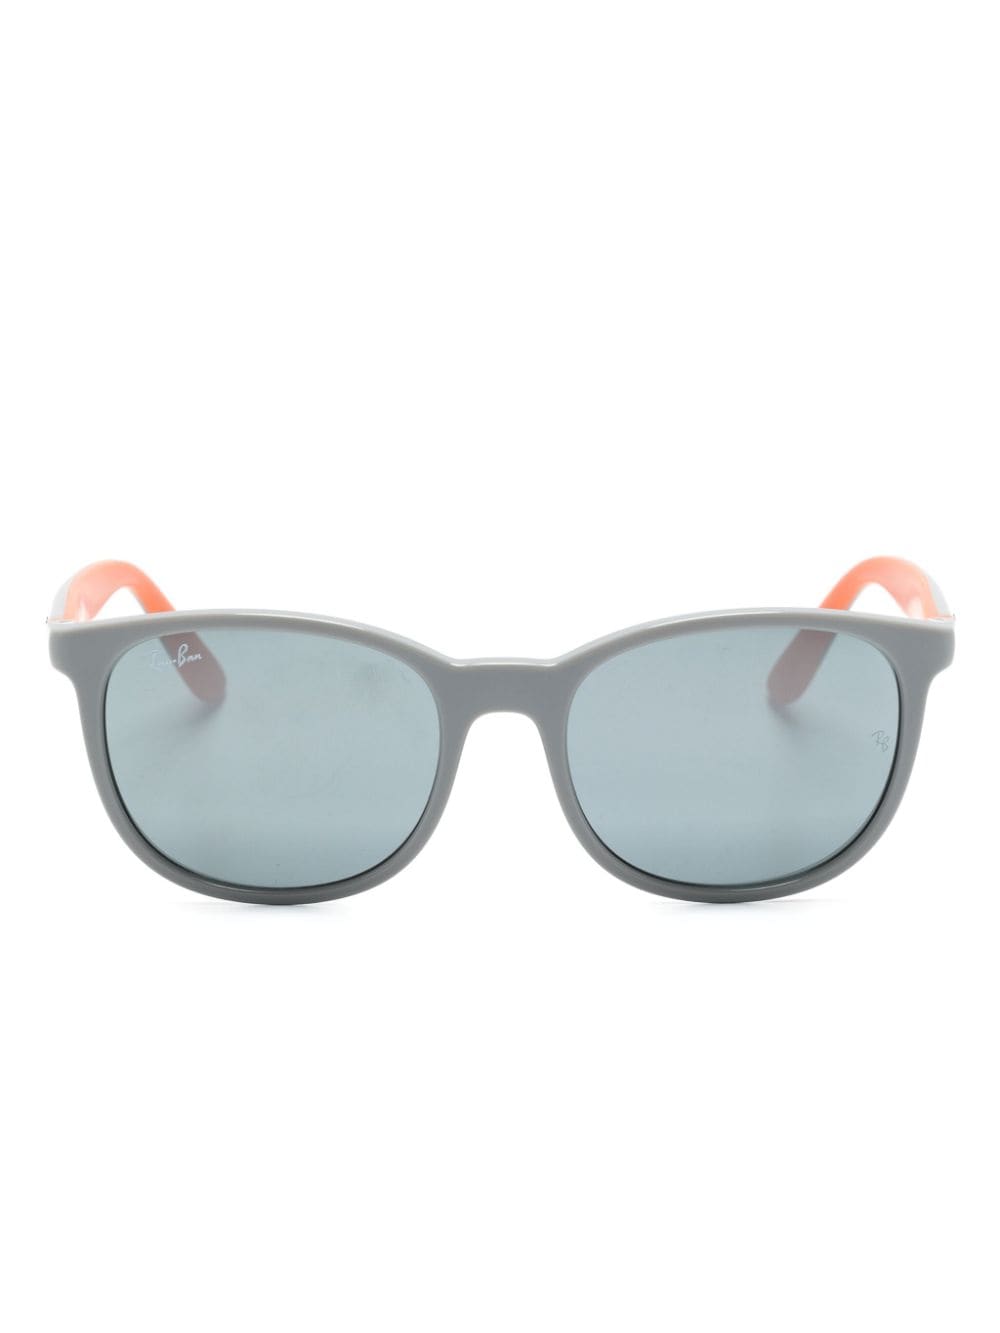 Ray-ban Junior Kids' Square-frame Sunglasses In Gray